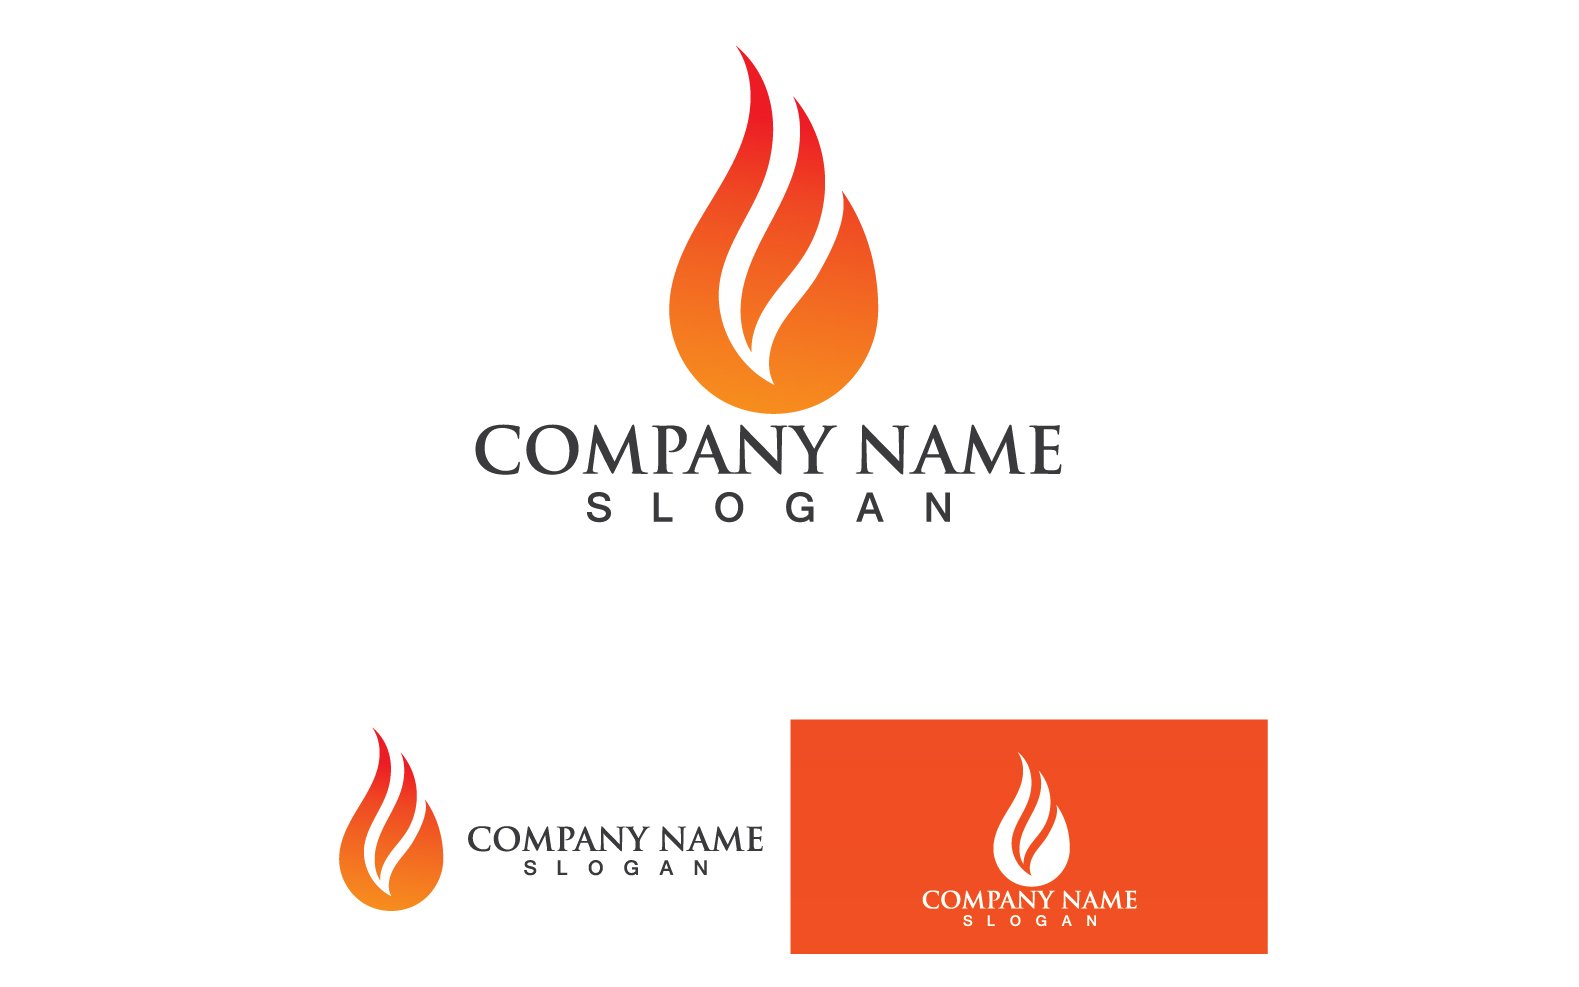 Wing Bird Business Logo Your Company Name V12